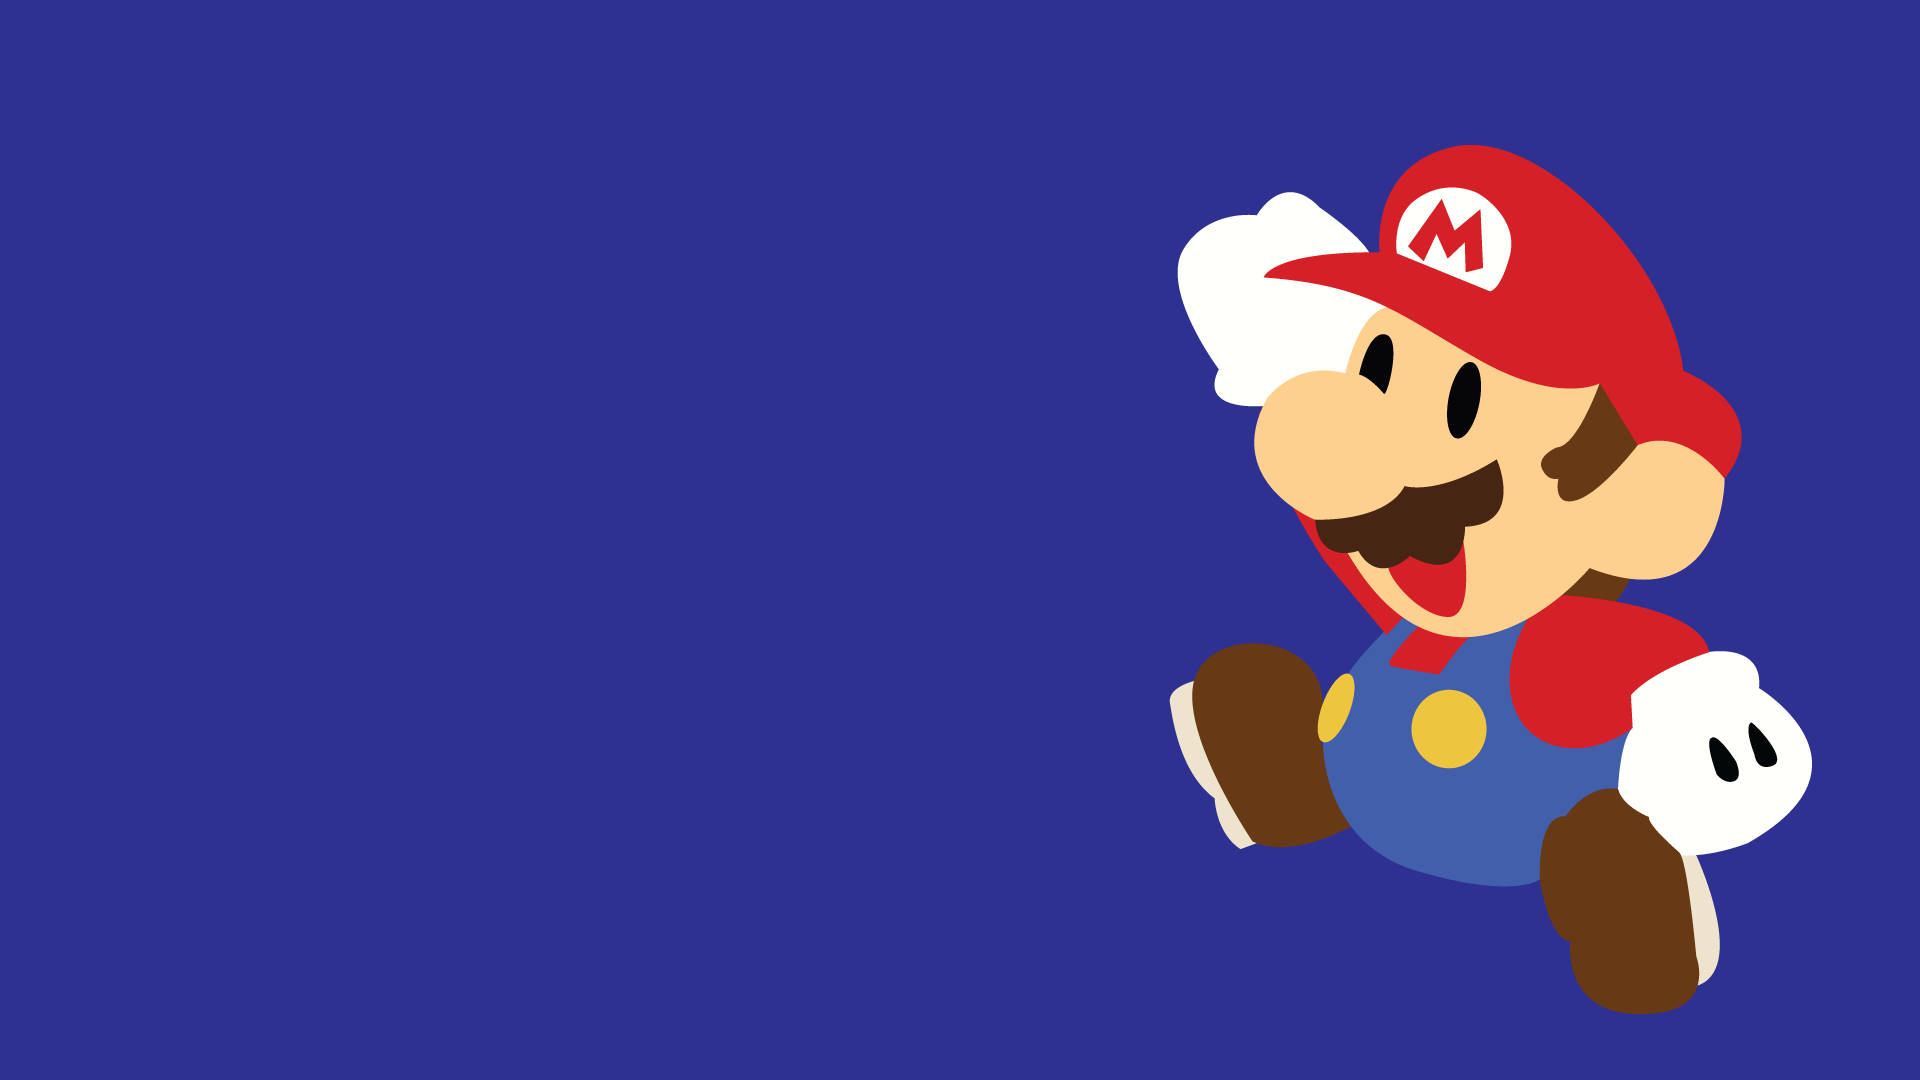 1920x1080 41 Mario Wallpapers \u0026 Backgrounds For FREE